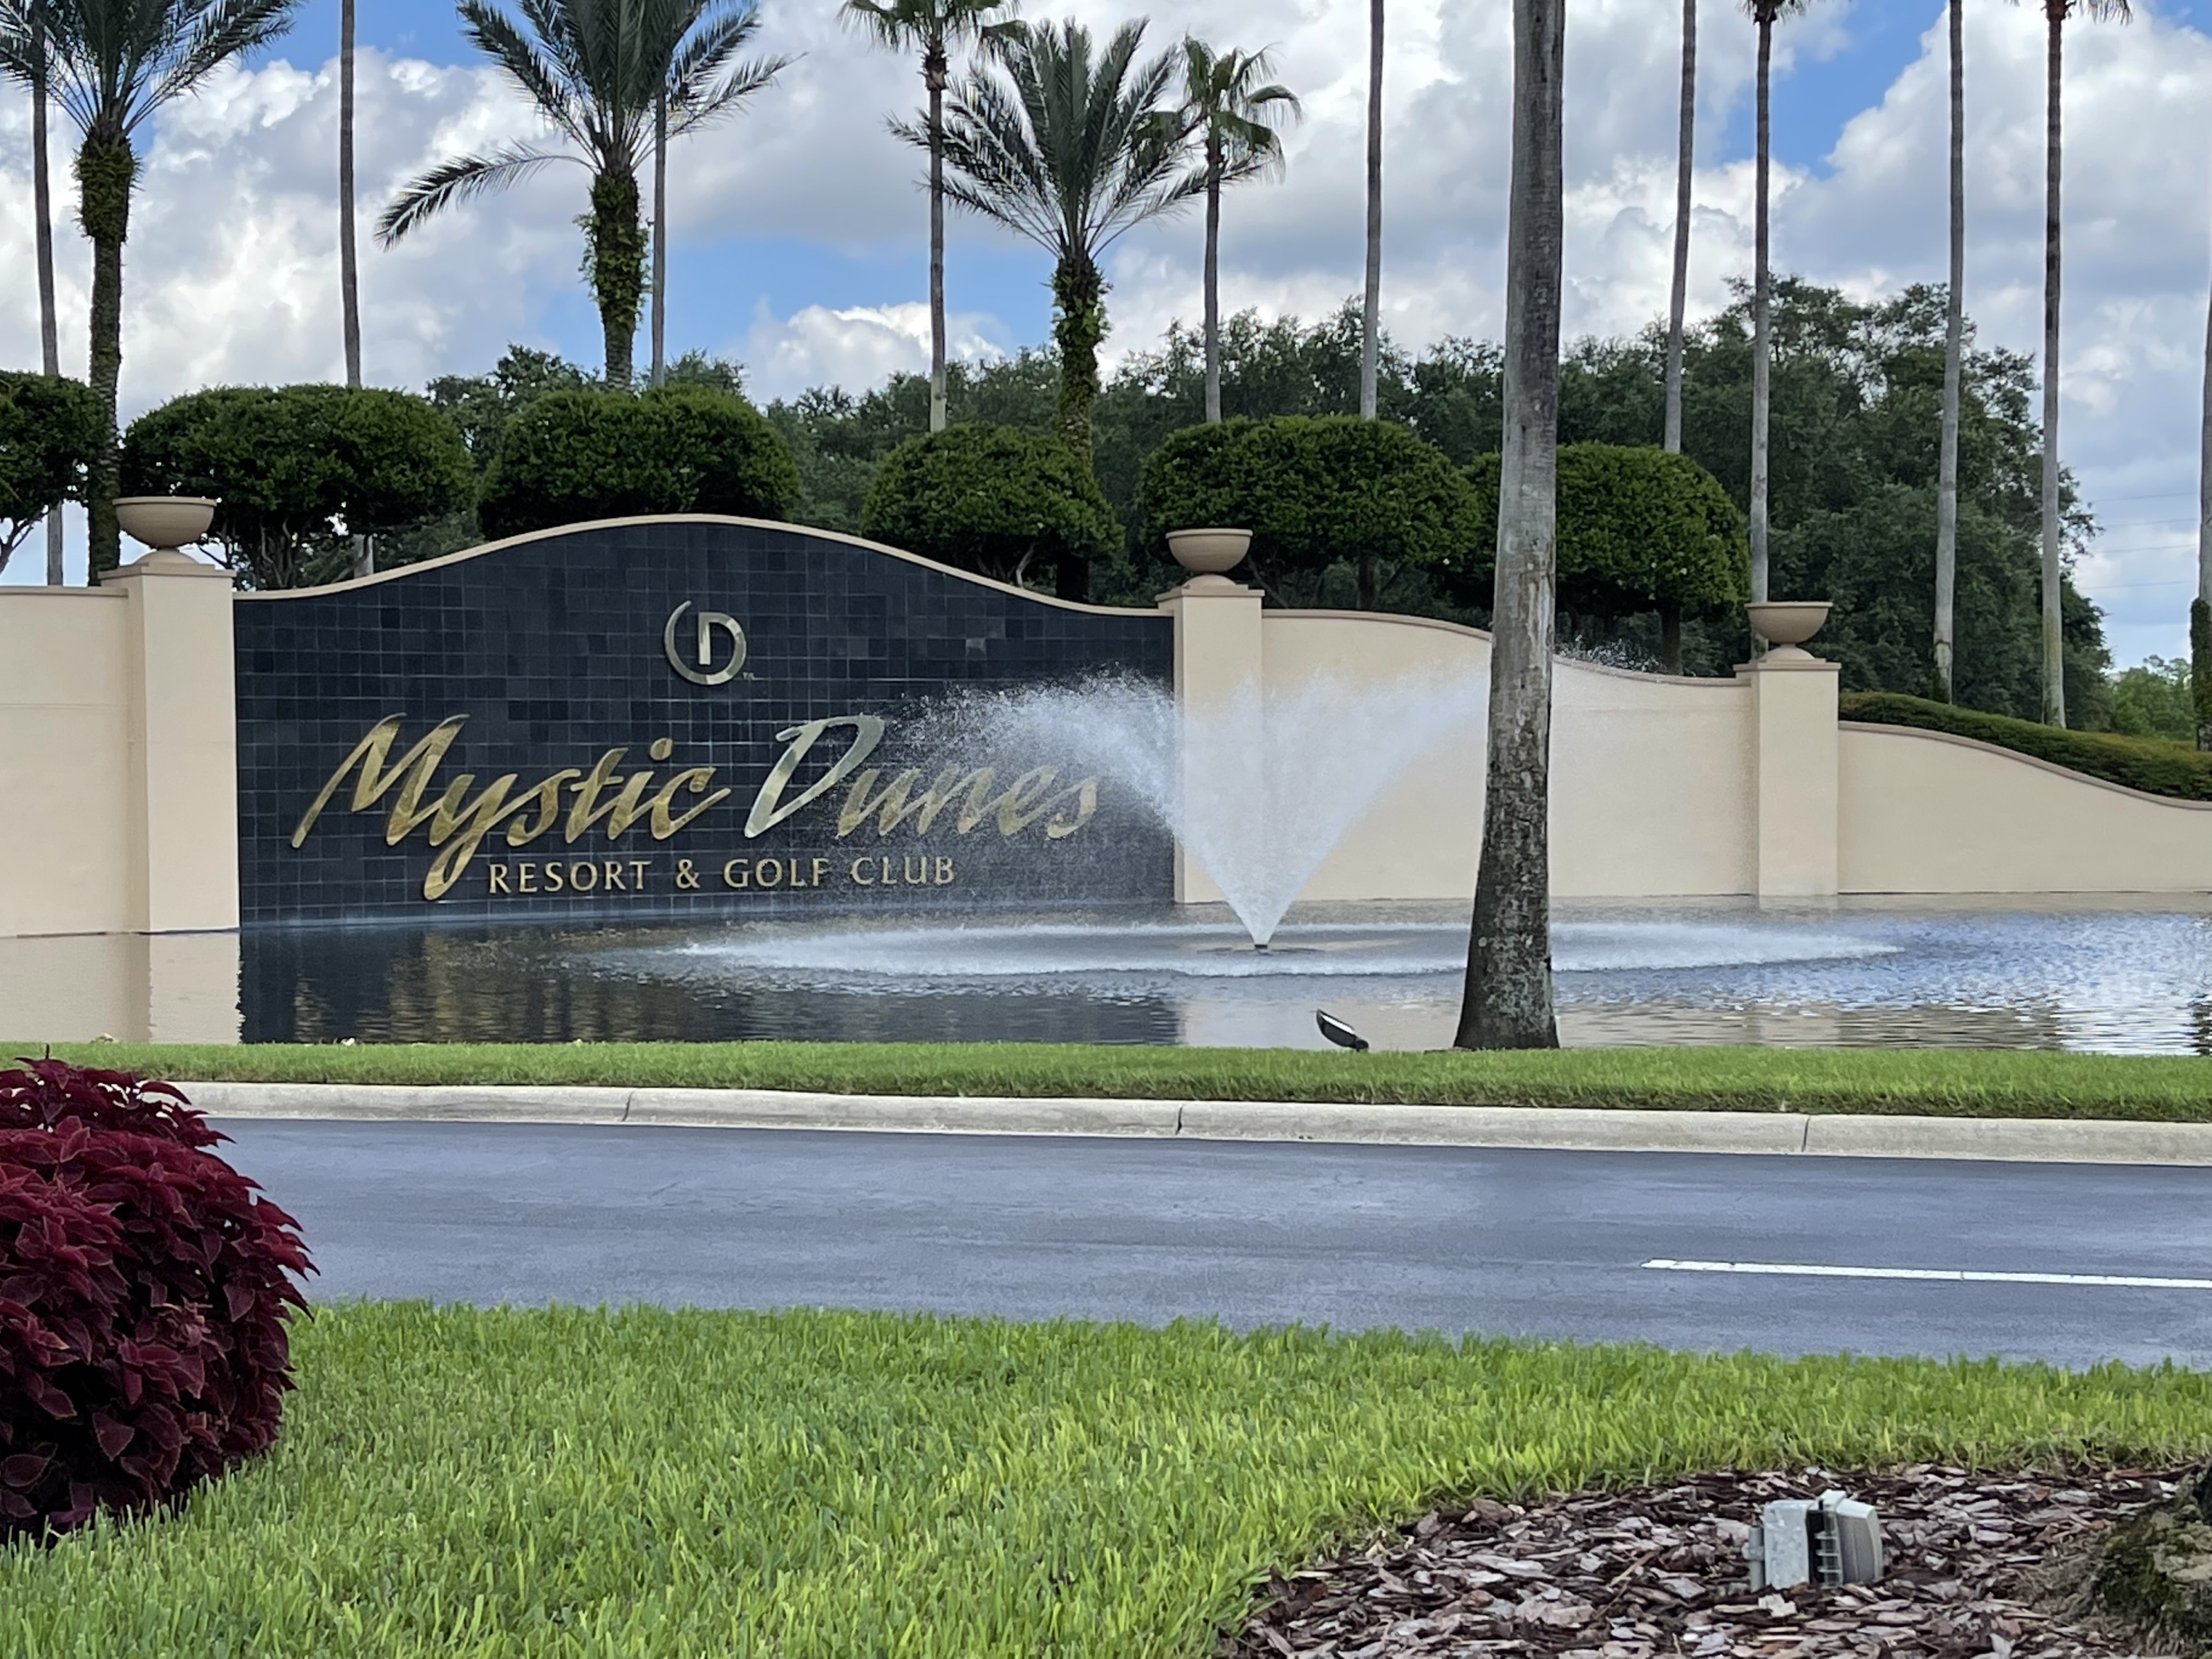 Mystic Dunes Resort: The good and bad review you need to read - Page 2